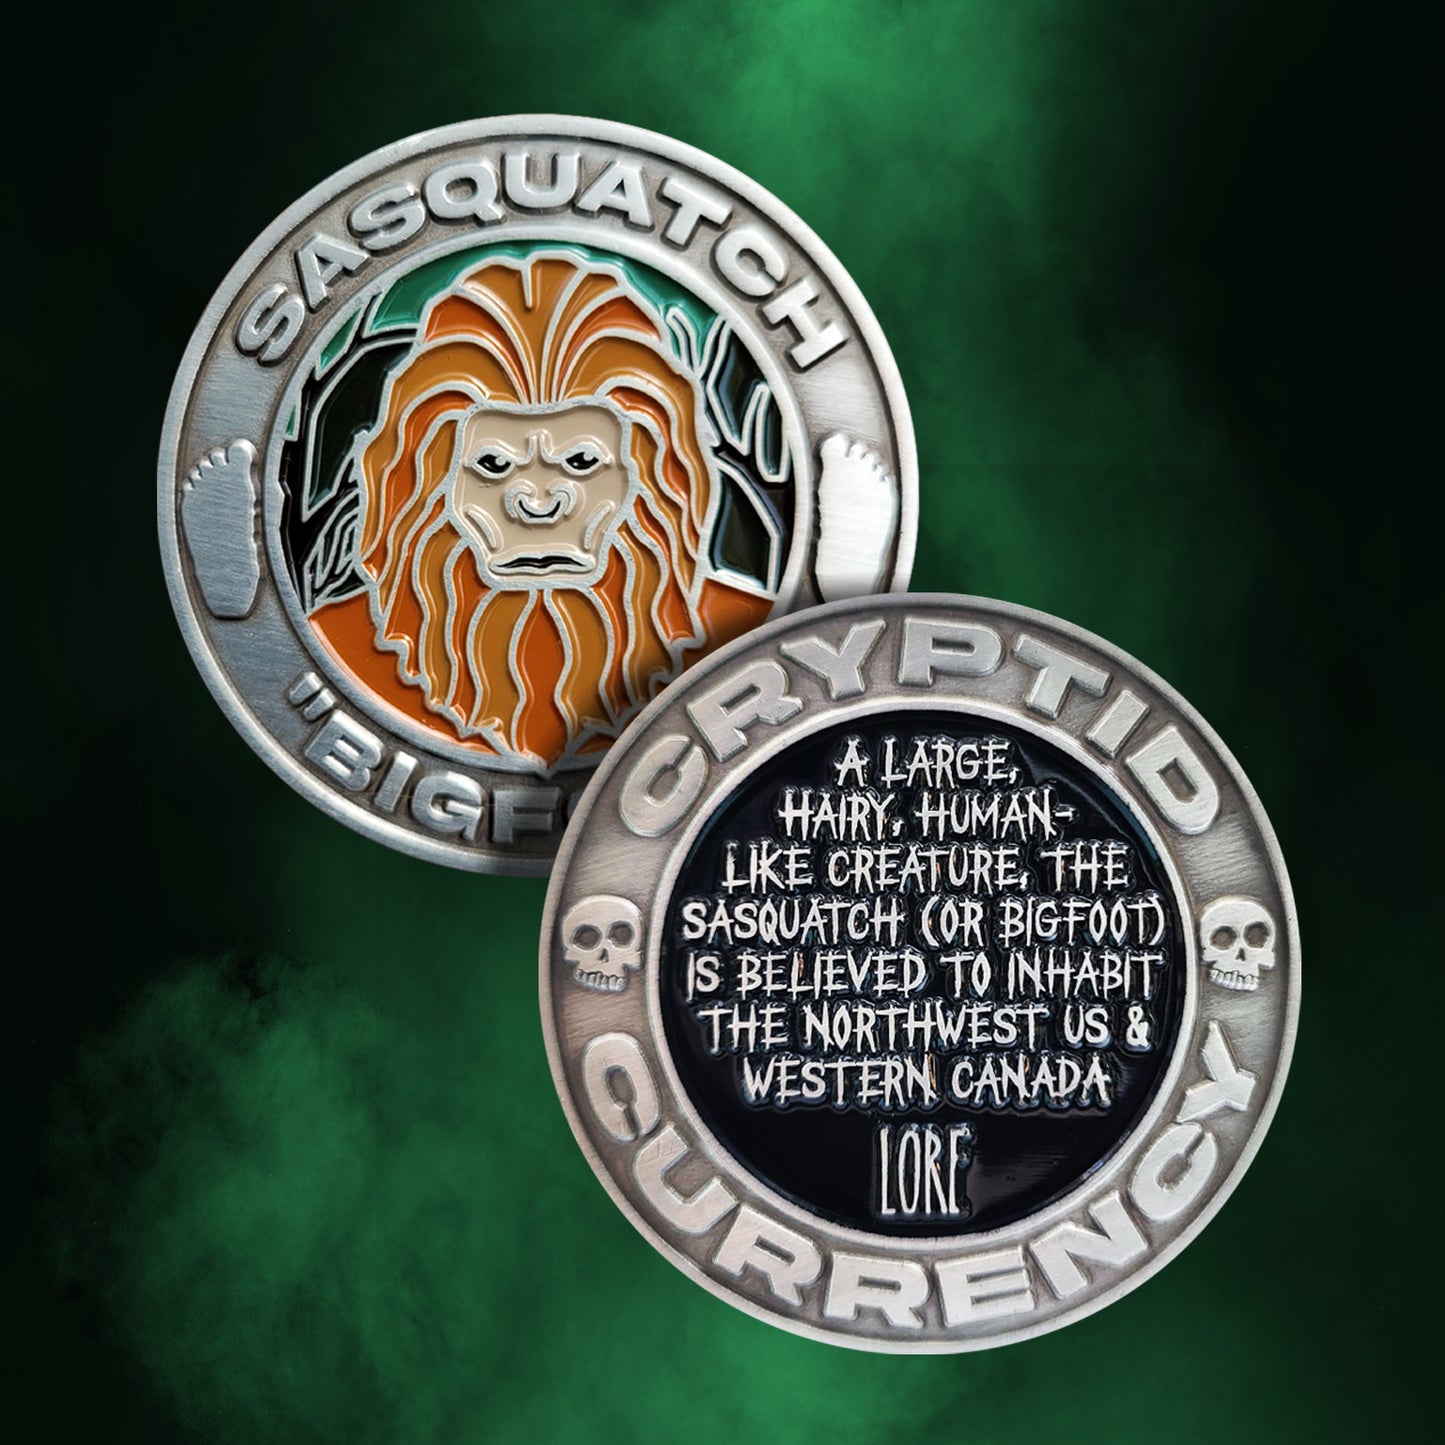 A silver challenge coin on a green and black background. One side features the words "CRYPTID CURRENCY" and two small skulls around the edge, with a black circle containing the words “A large, hairy, human-like creature, the Sasquatch (or bigfoot) is believed to inhabit the northwest US and western Canada” and "LORE" in silver. The other side features the words “SASQUATCH” and “BIGFOOT” and two footprints around the edge, with a circle containing black and green trees and leaves, and a brown Sasquatch face.